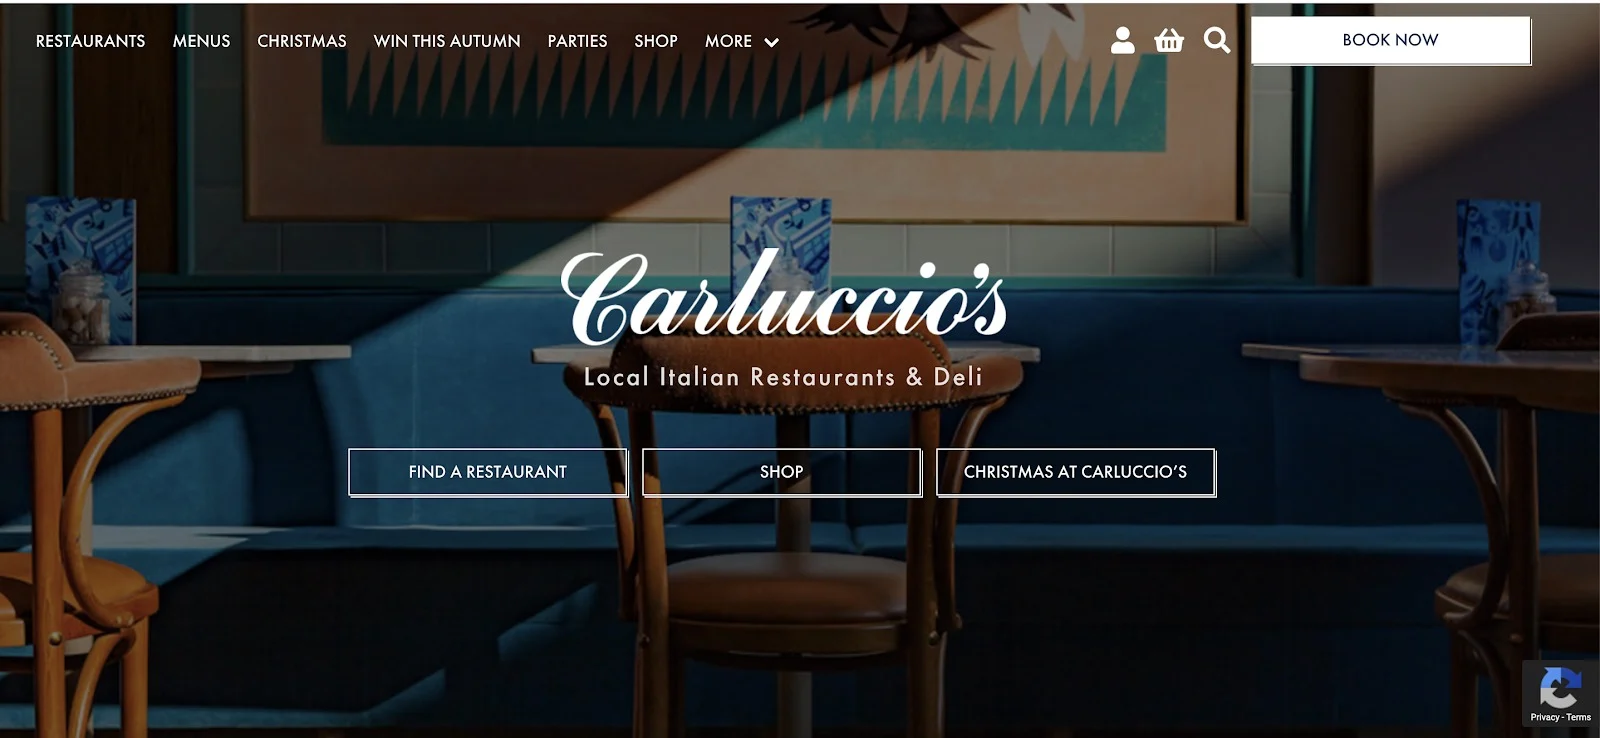 https://www-cdn.bigcommerce.com/assets/headless-commerce-category-carluccios.png